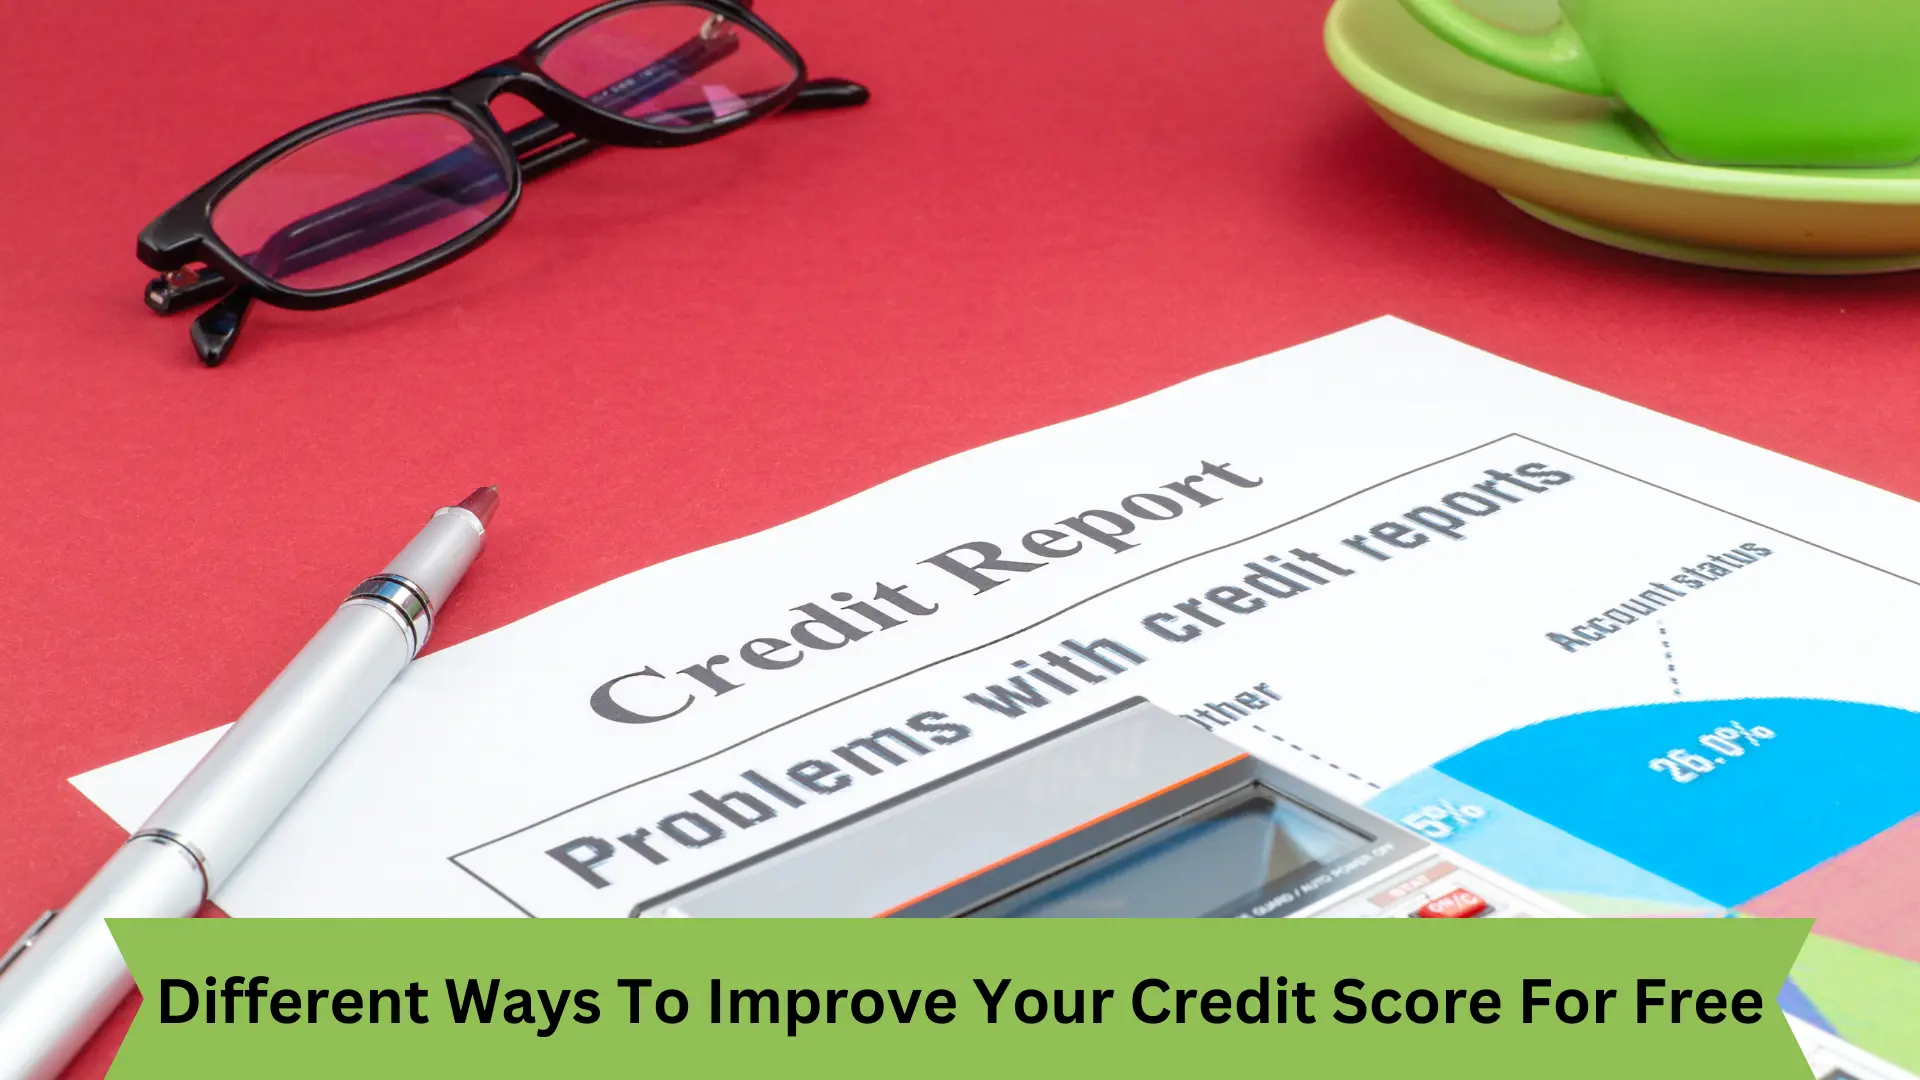 Increase Credit Score: Free Ways to Improve Your Financial Health